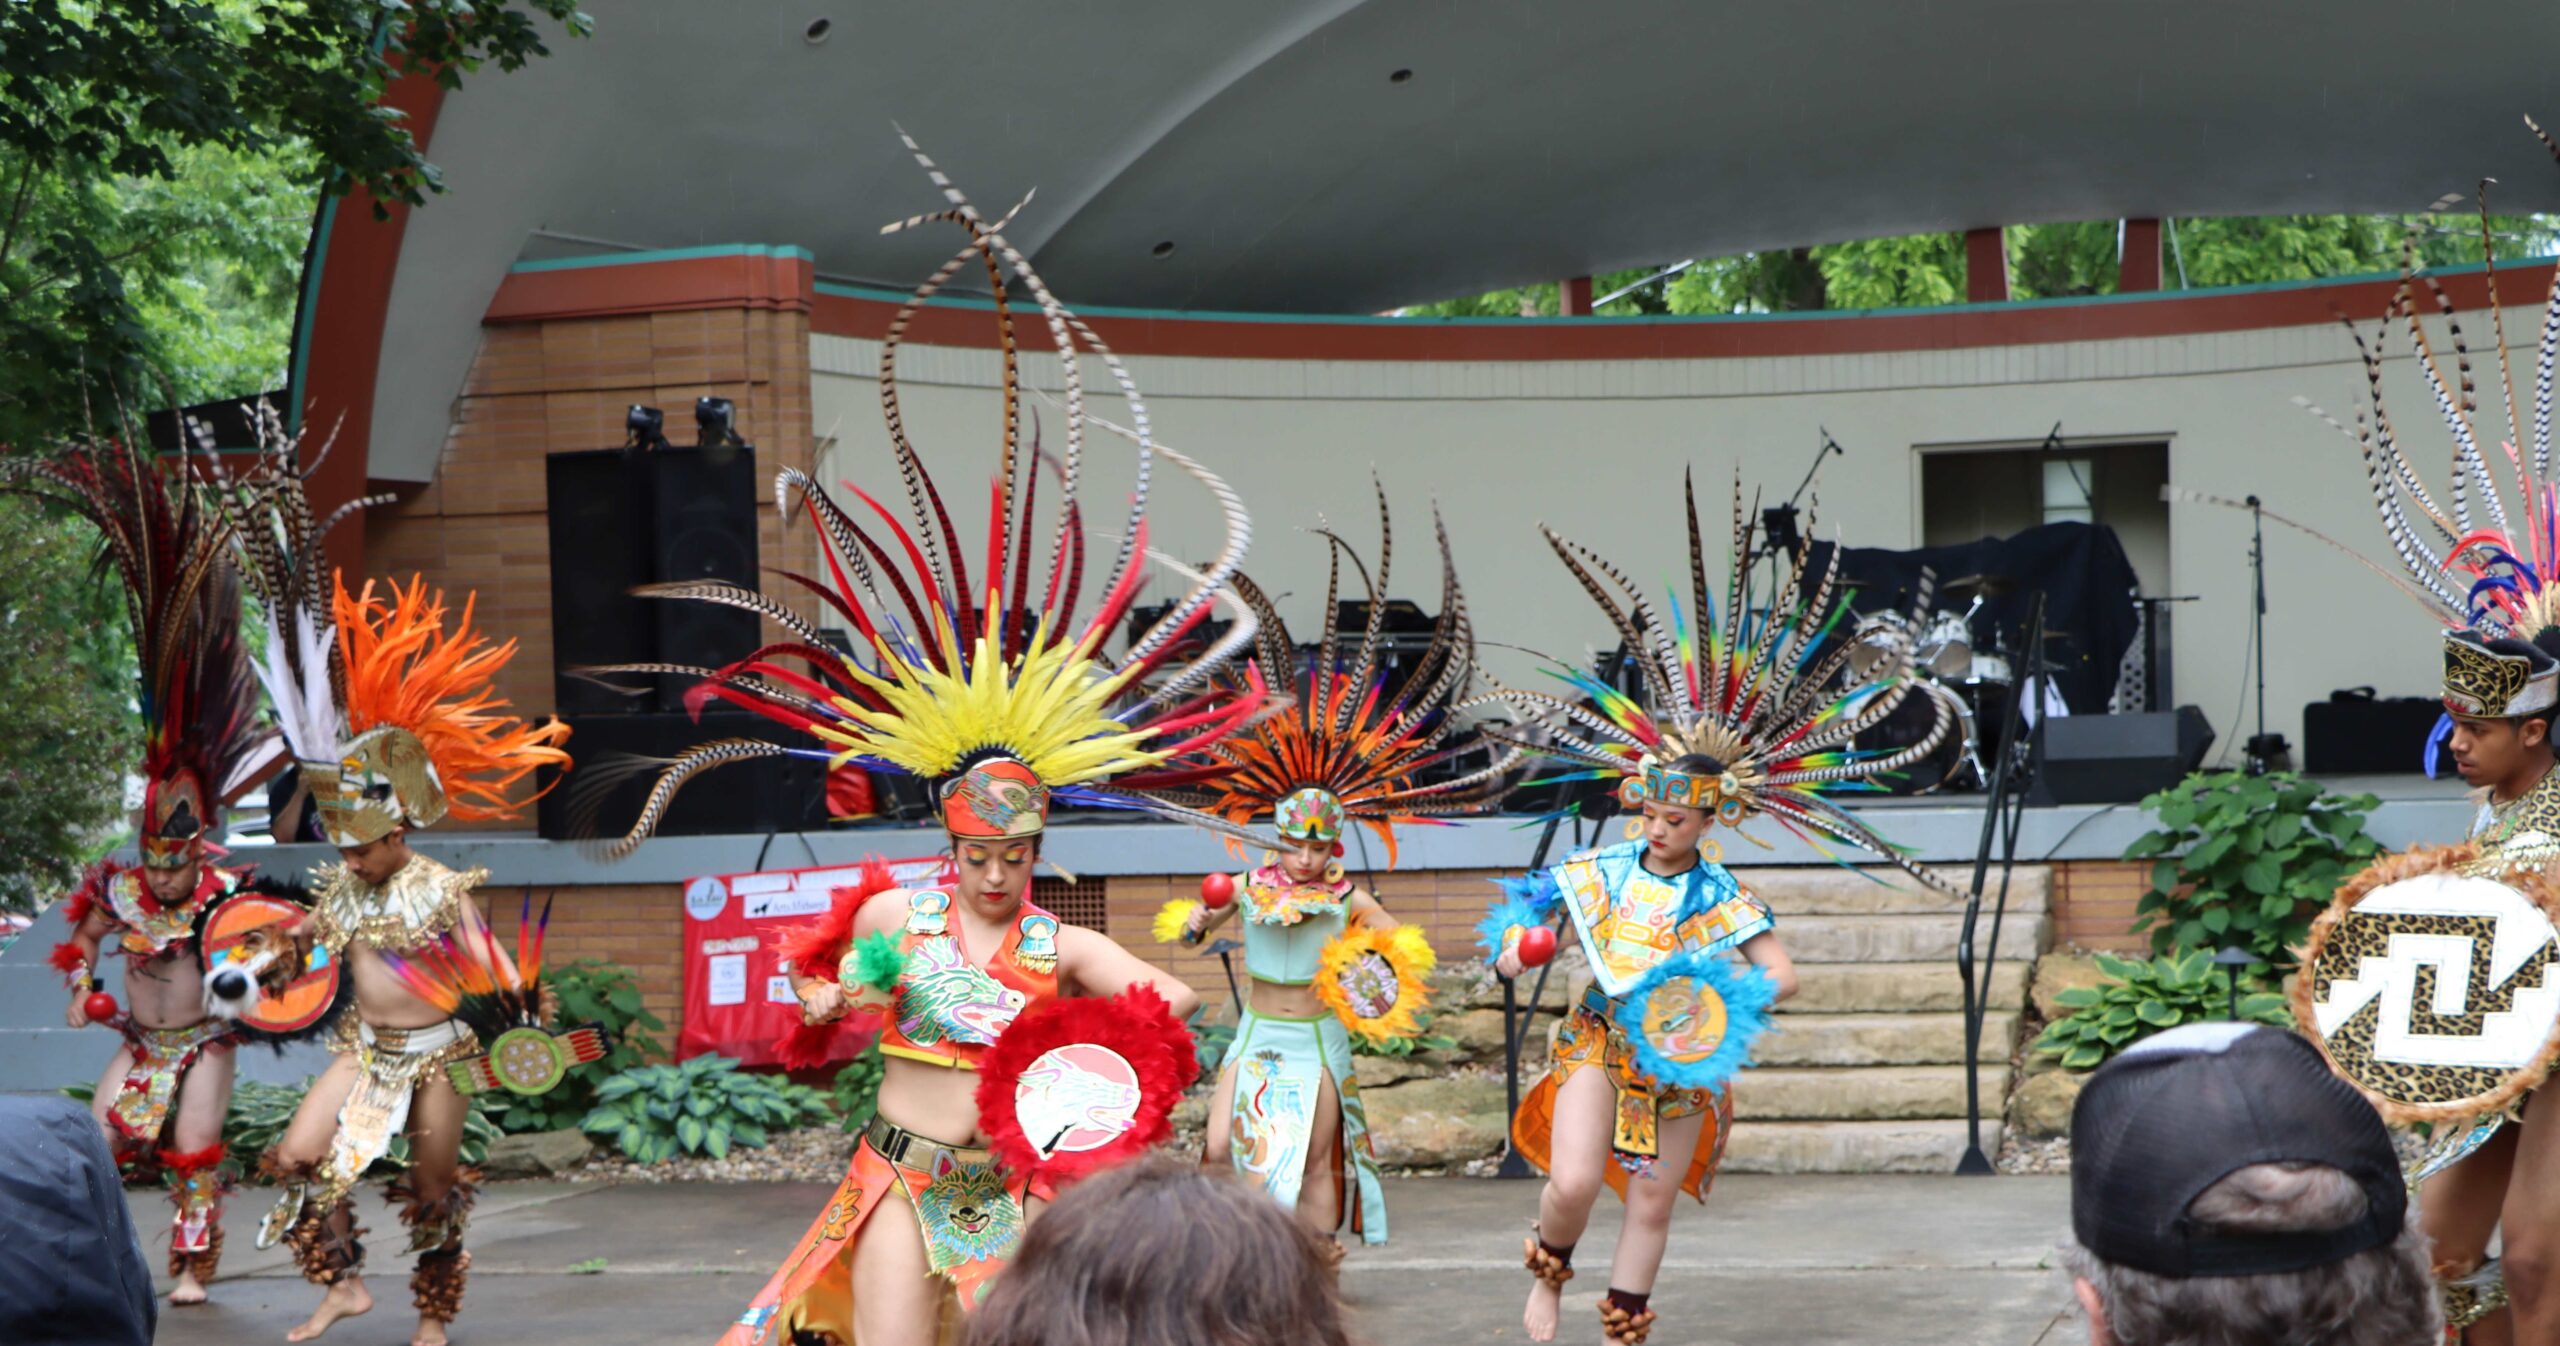 Dancers in aztec garb and feathers perform in an outdoor amphitheater